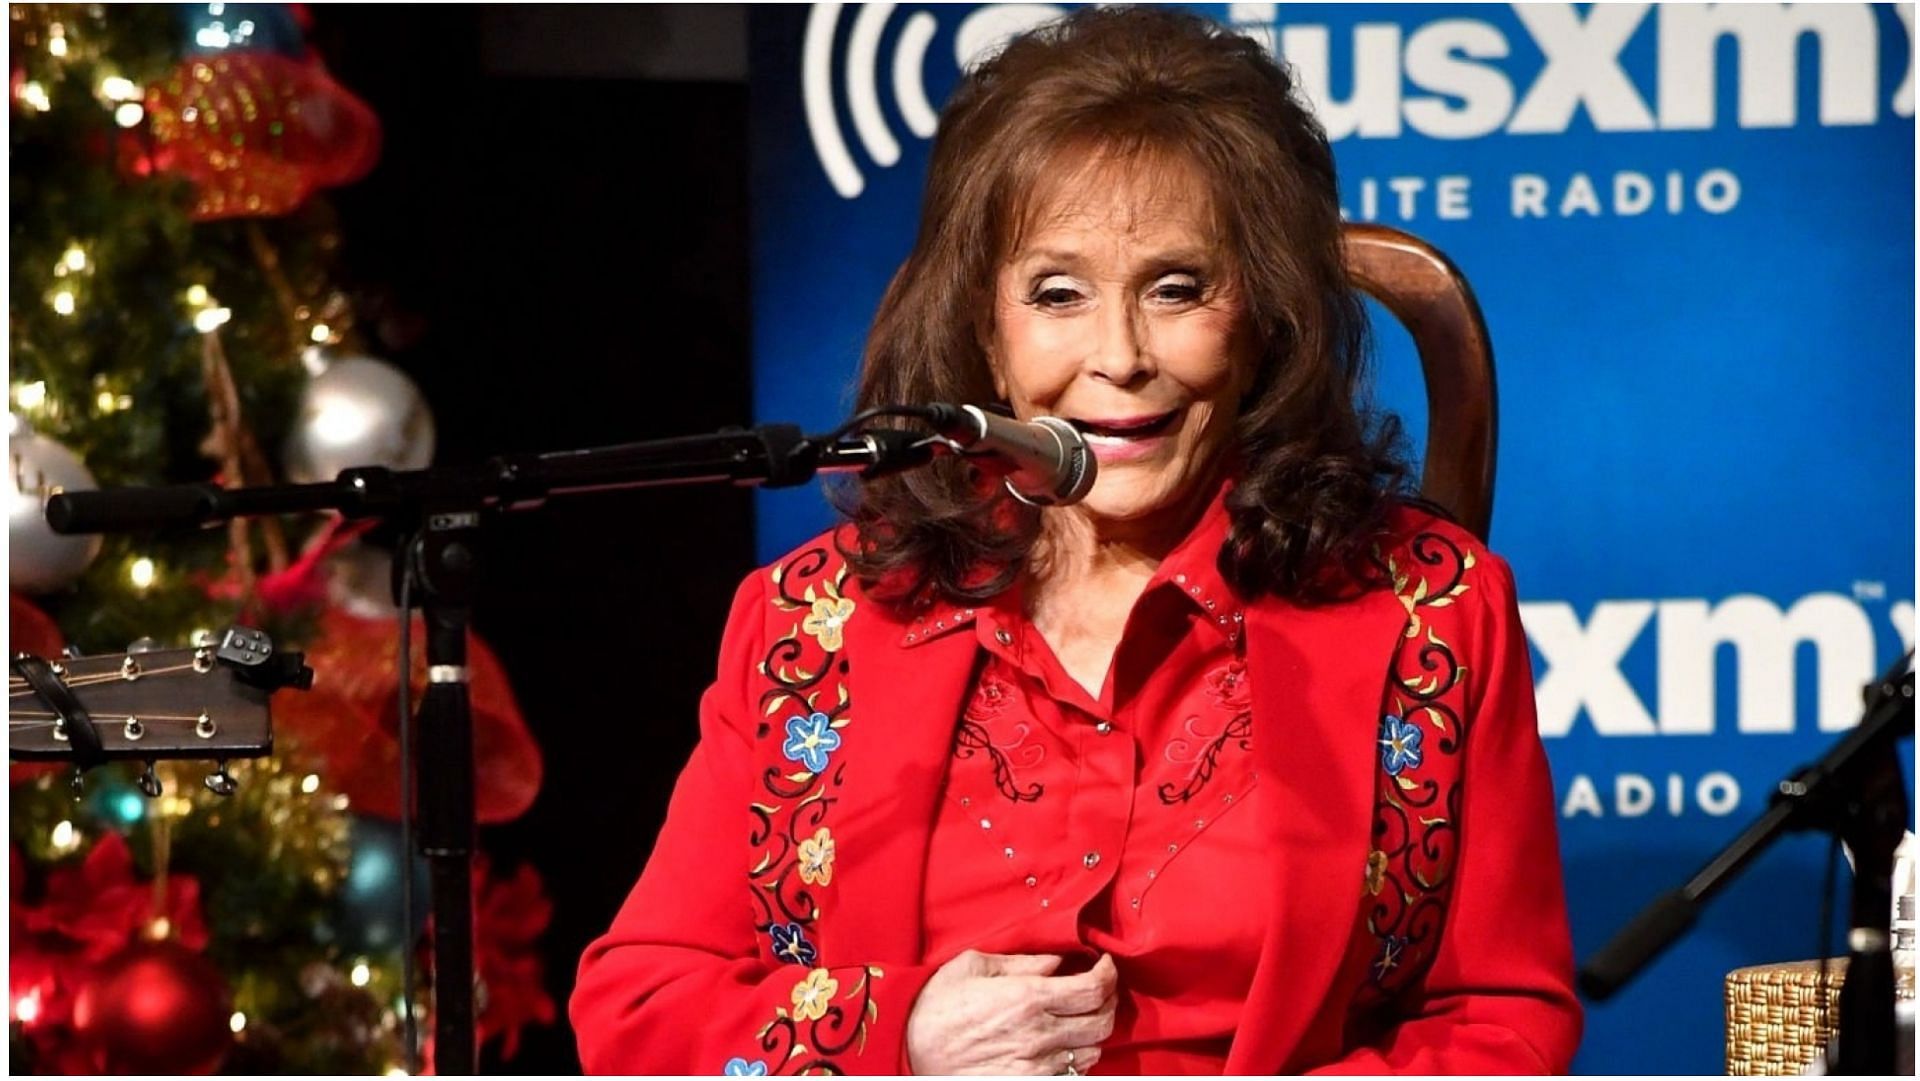 Loretta Lynn was a well-known singer and songwriter (Image via Jason Davis/Getty Images)